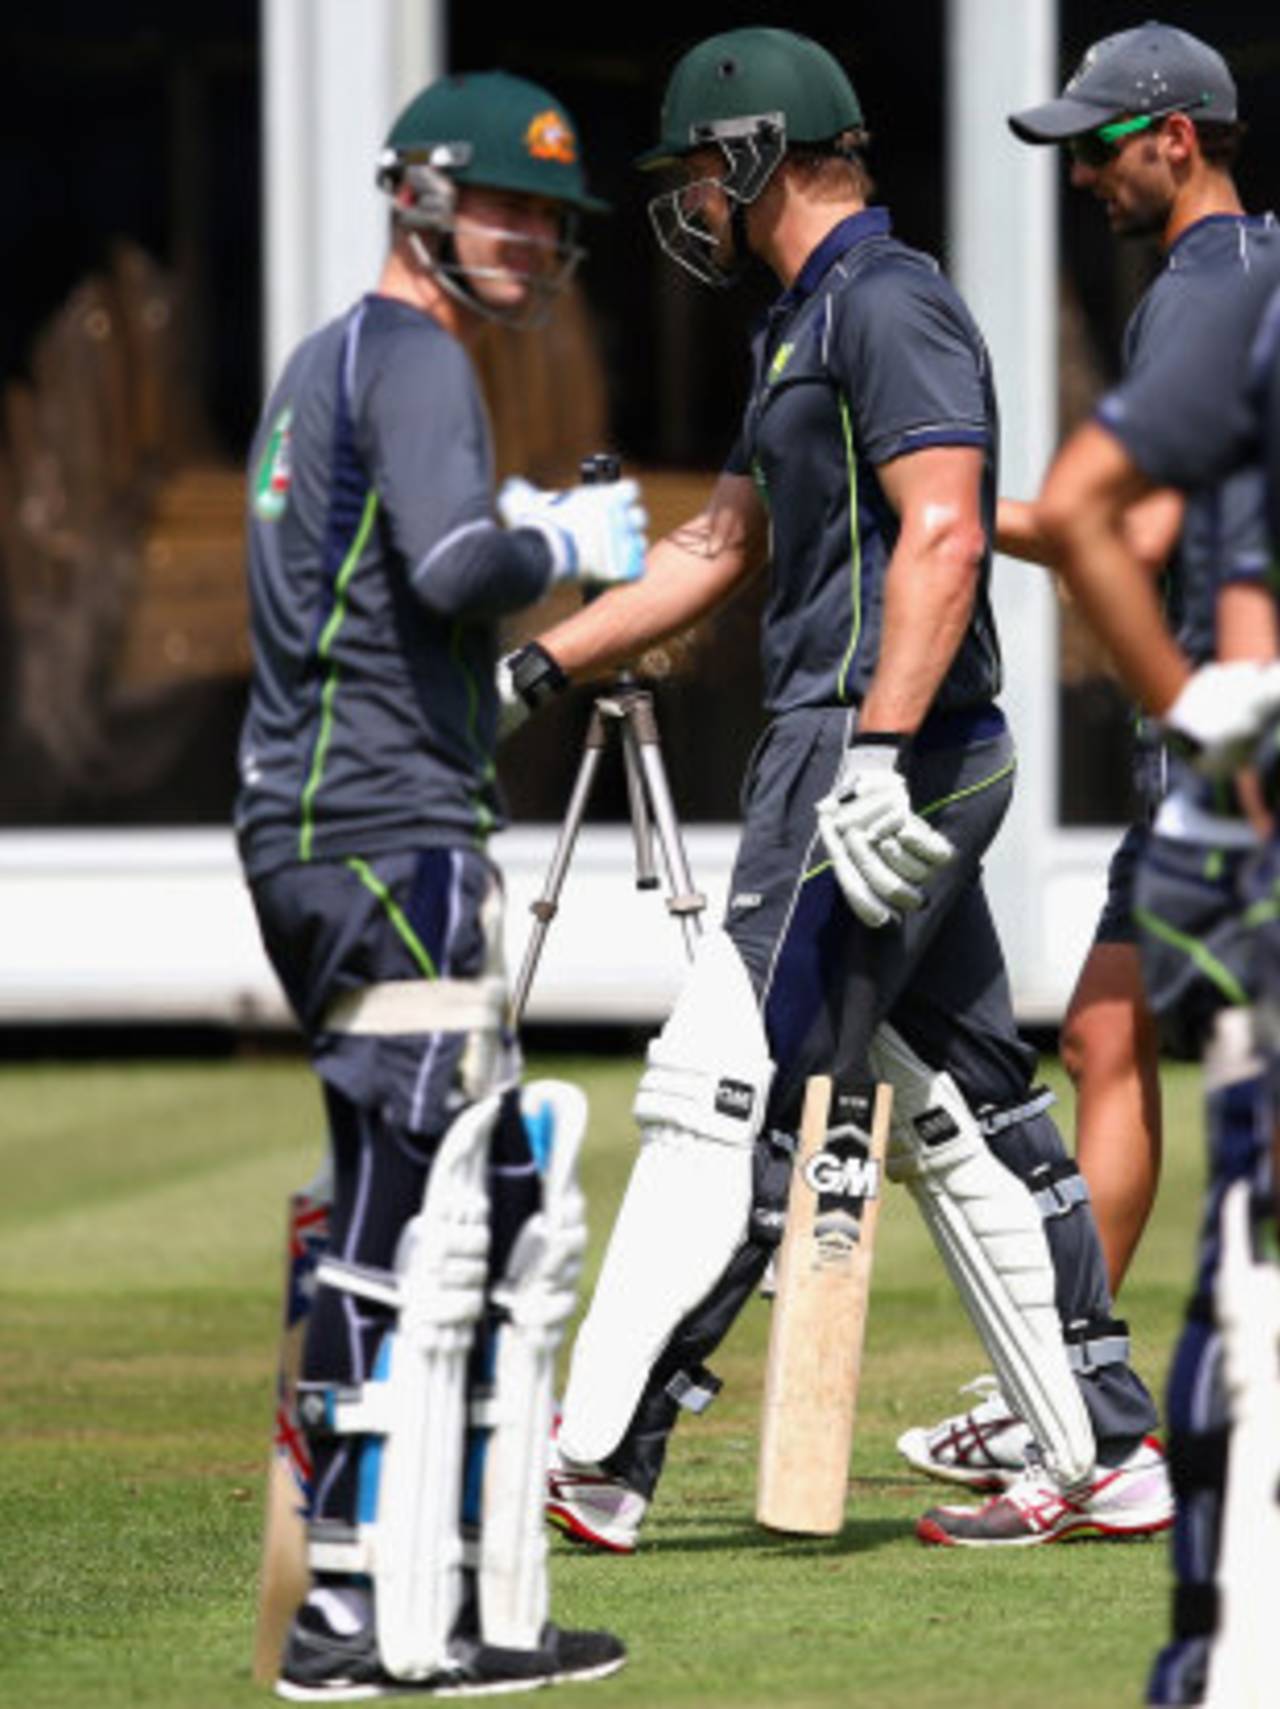 Shane Watson and Michael Clarke practice ahead of the second Ashes Test, Lord's, July 16, 2013